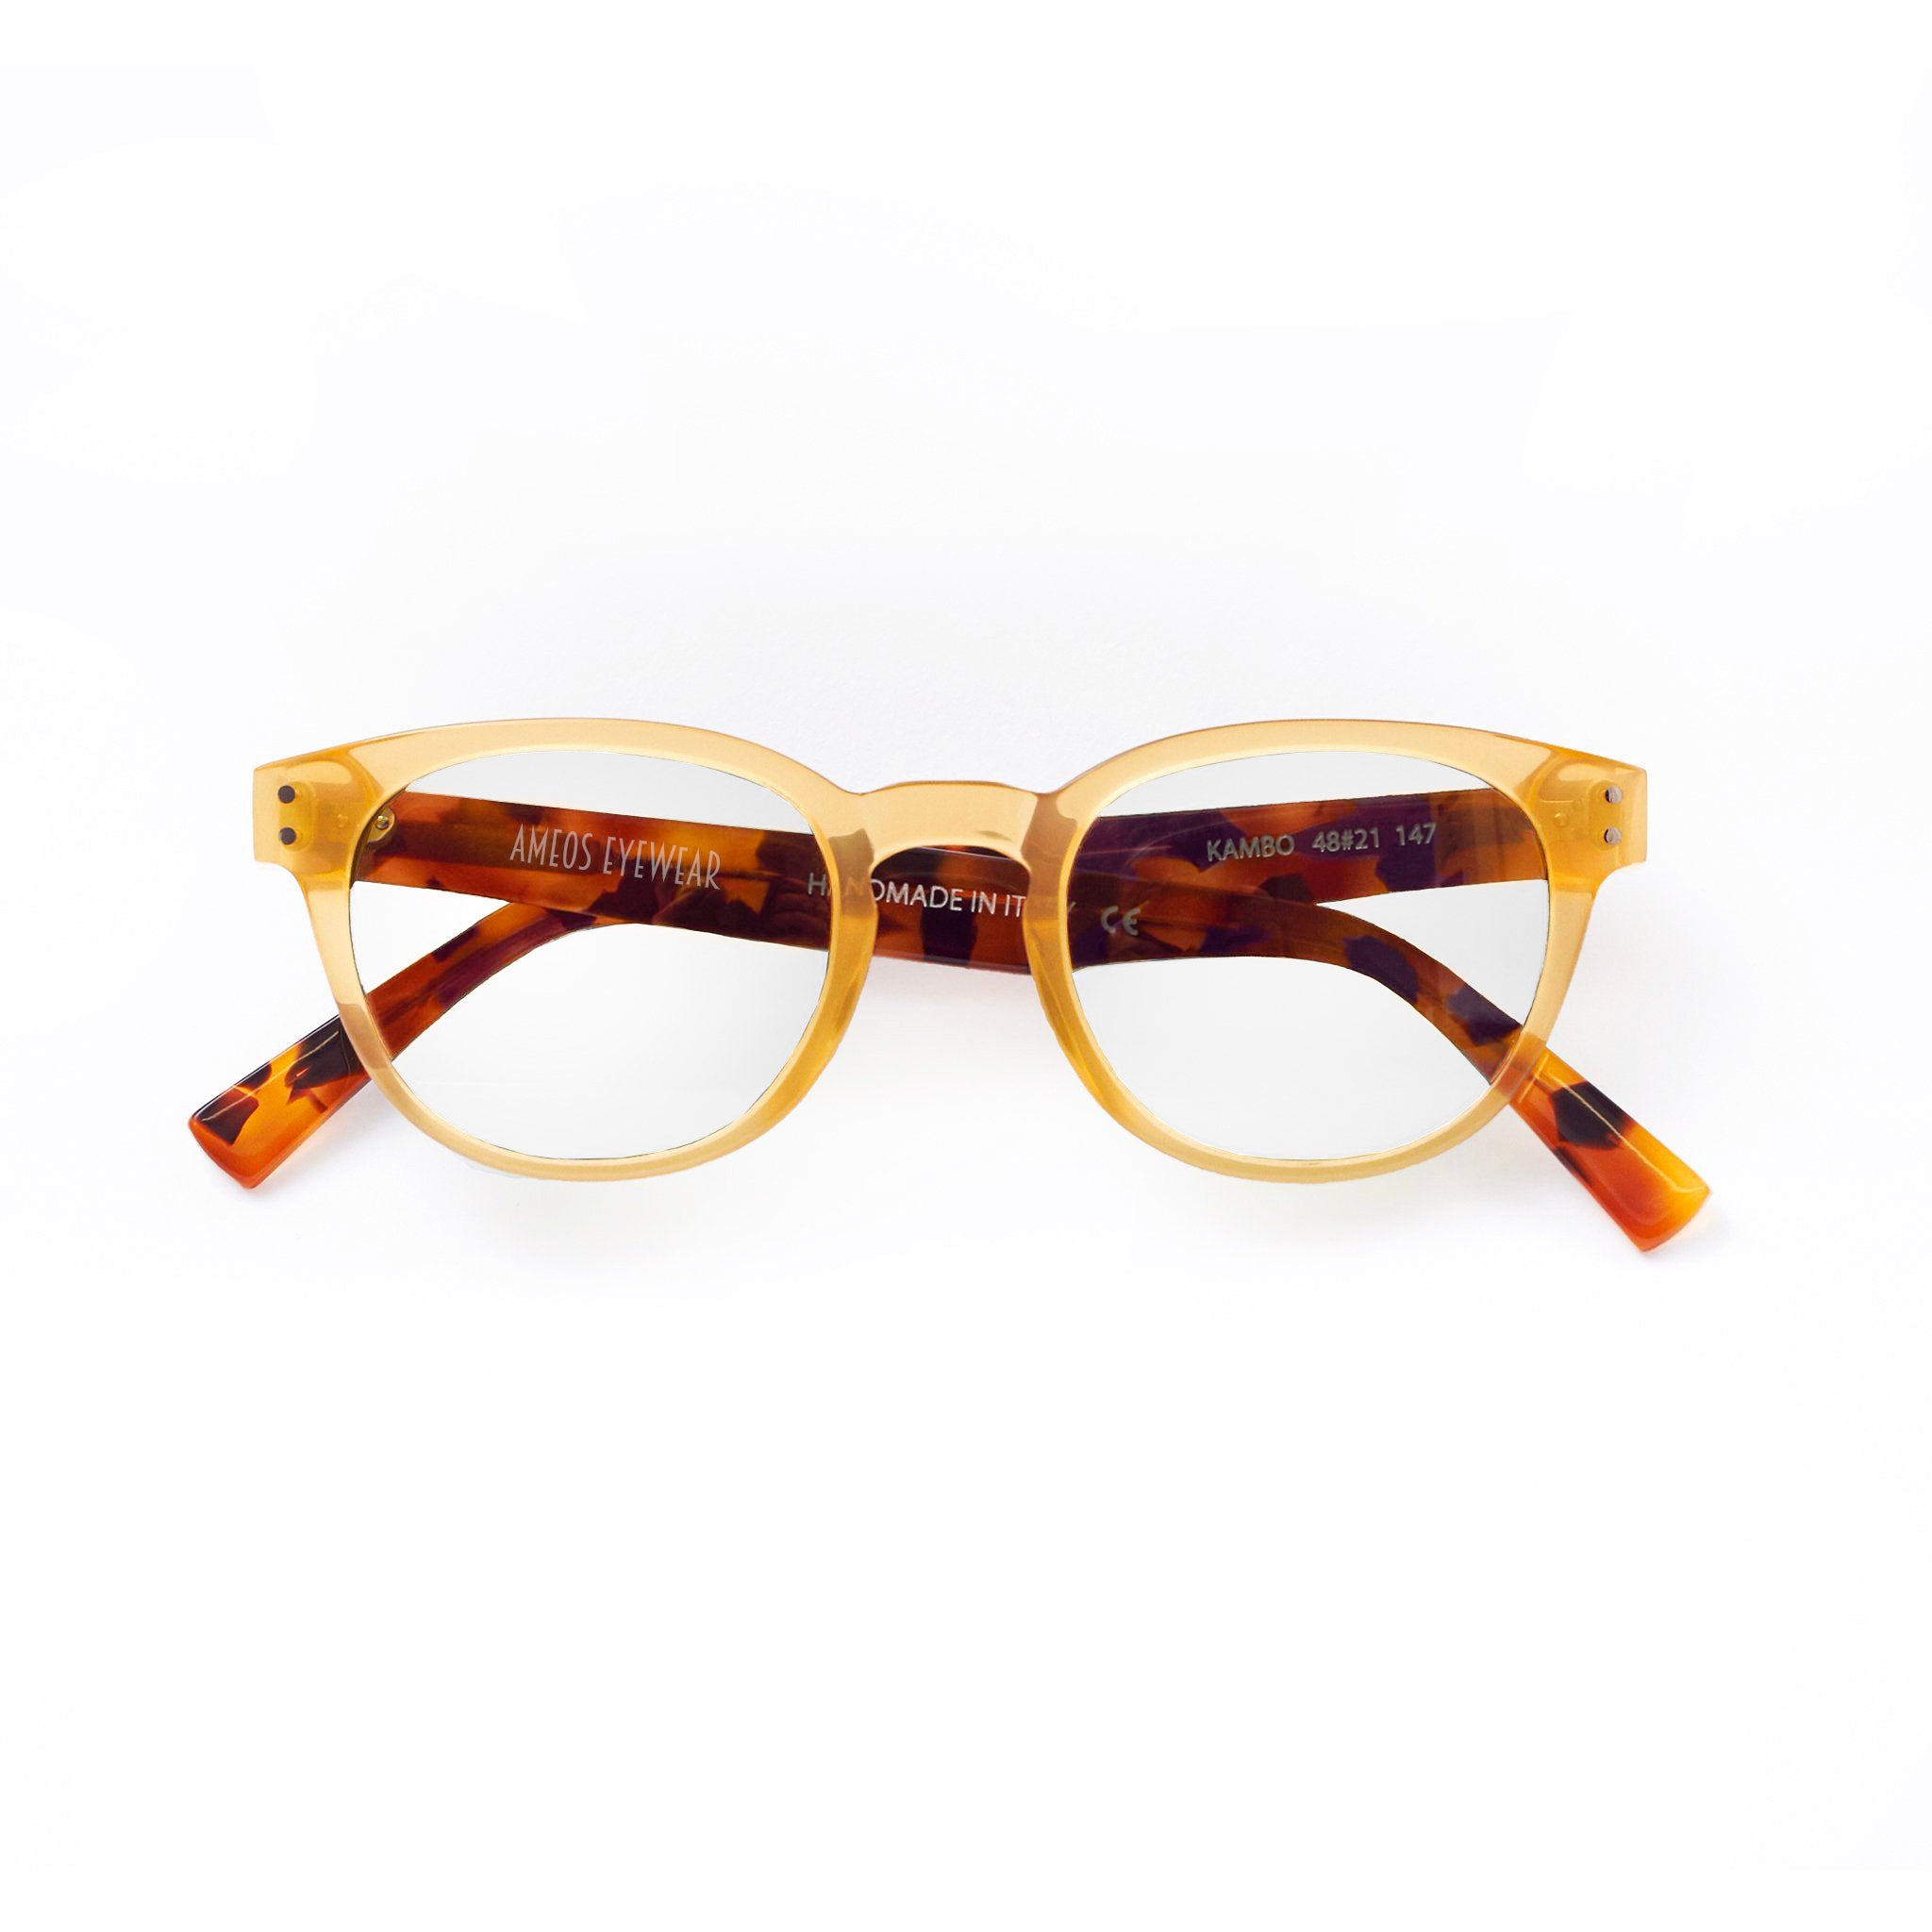 Ameos eyewear kambo optical glasses in yellow and tortoise frames, unisex and handmade in italy.